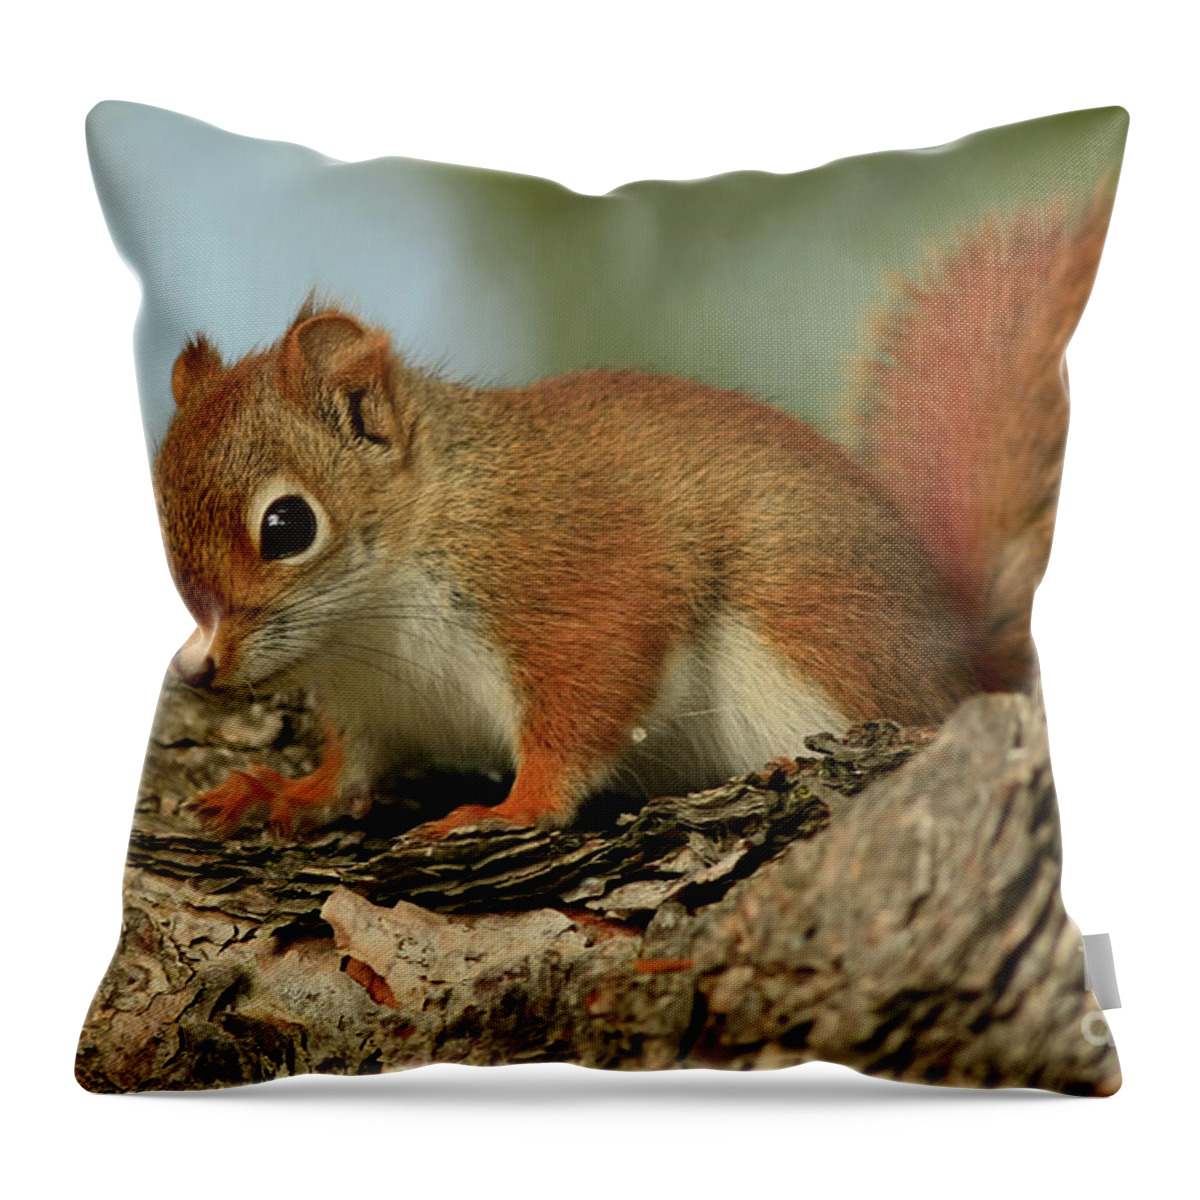 Curious Throw Pillow featuring the photograph Curious by Nature Red Squirrel by Inspired Nature Photography Fine Art Photography